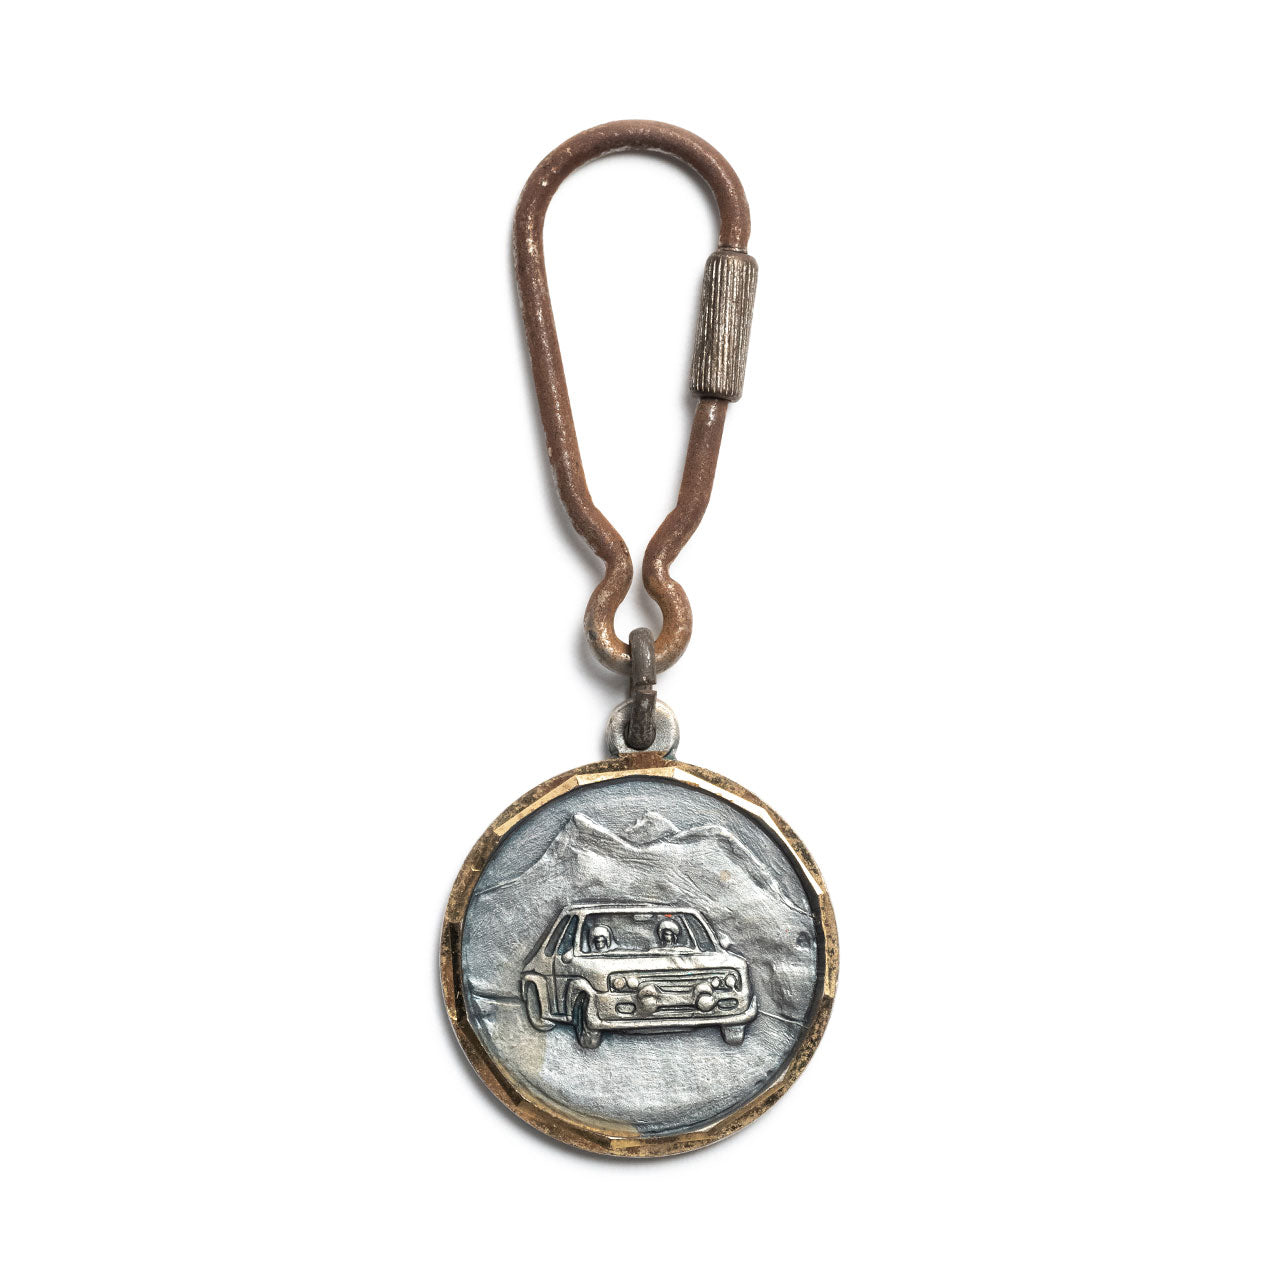 Mr. Cupps x Uncrate Vintage France Sport Keychain